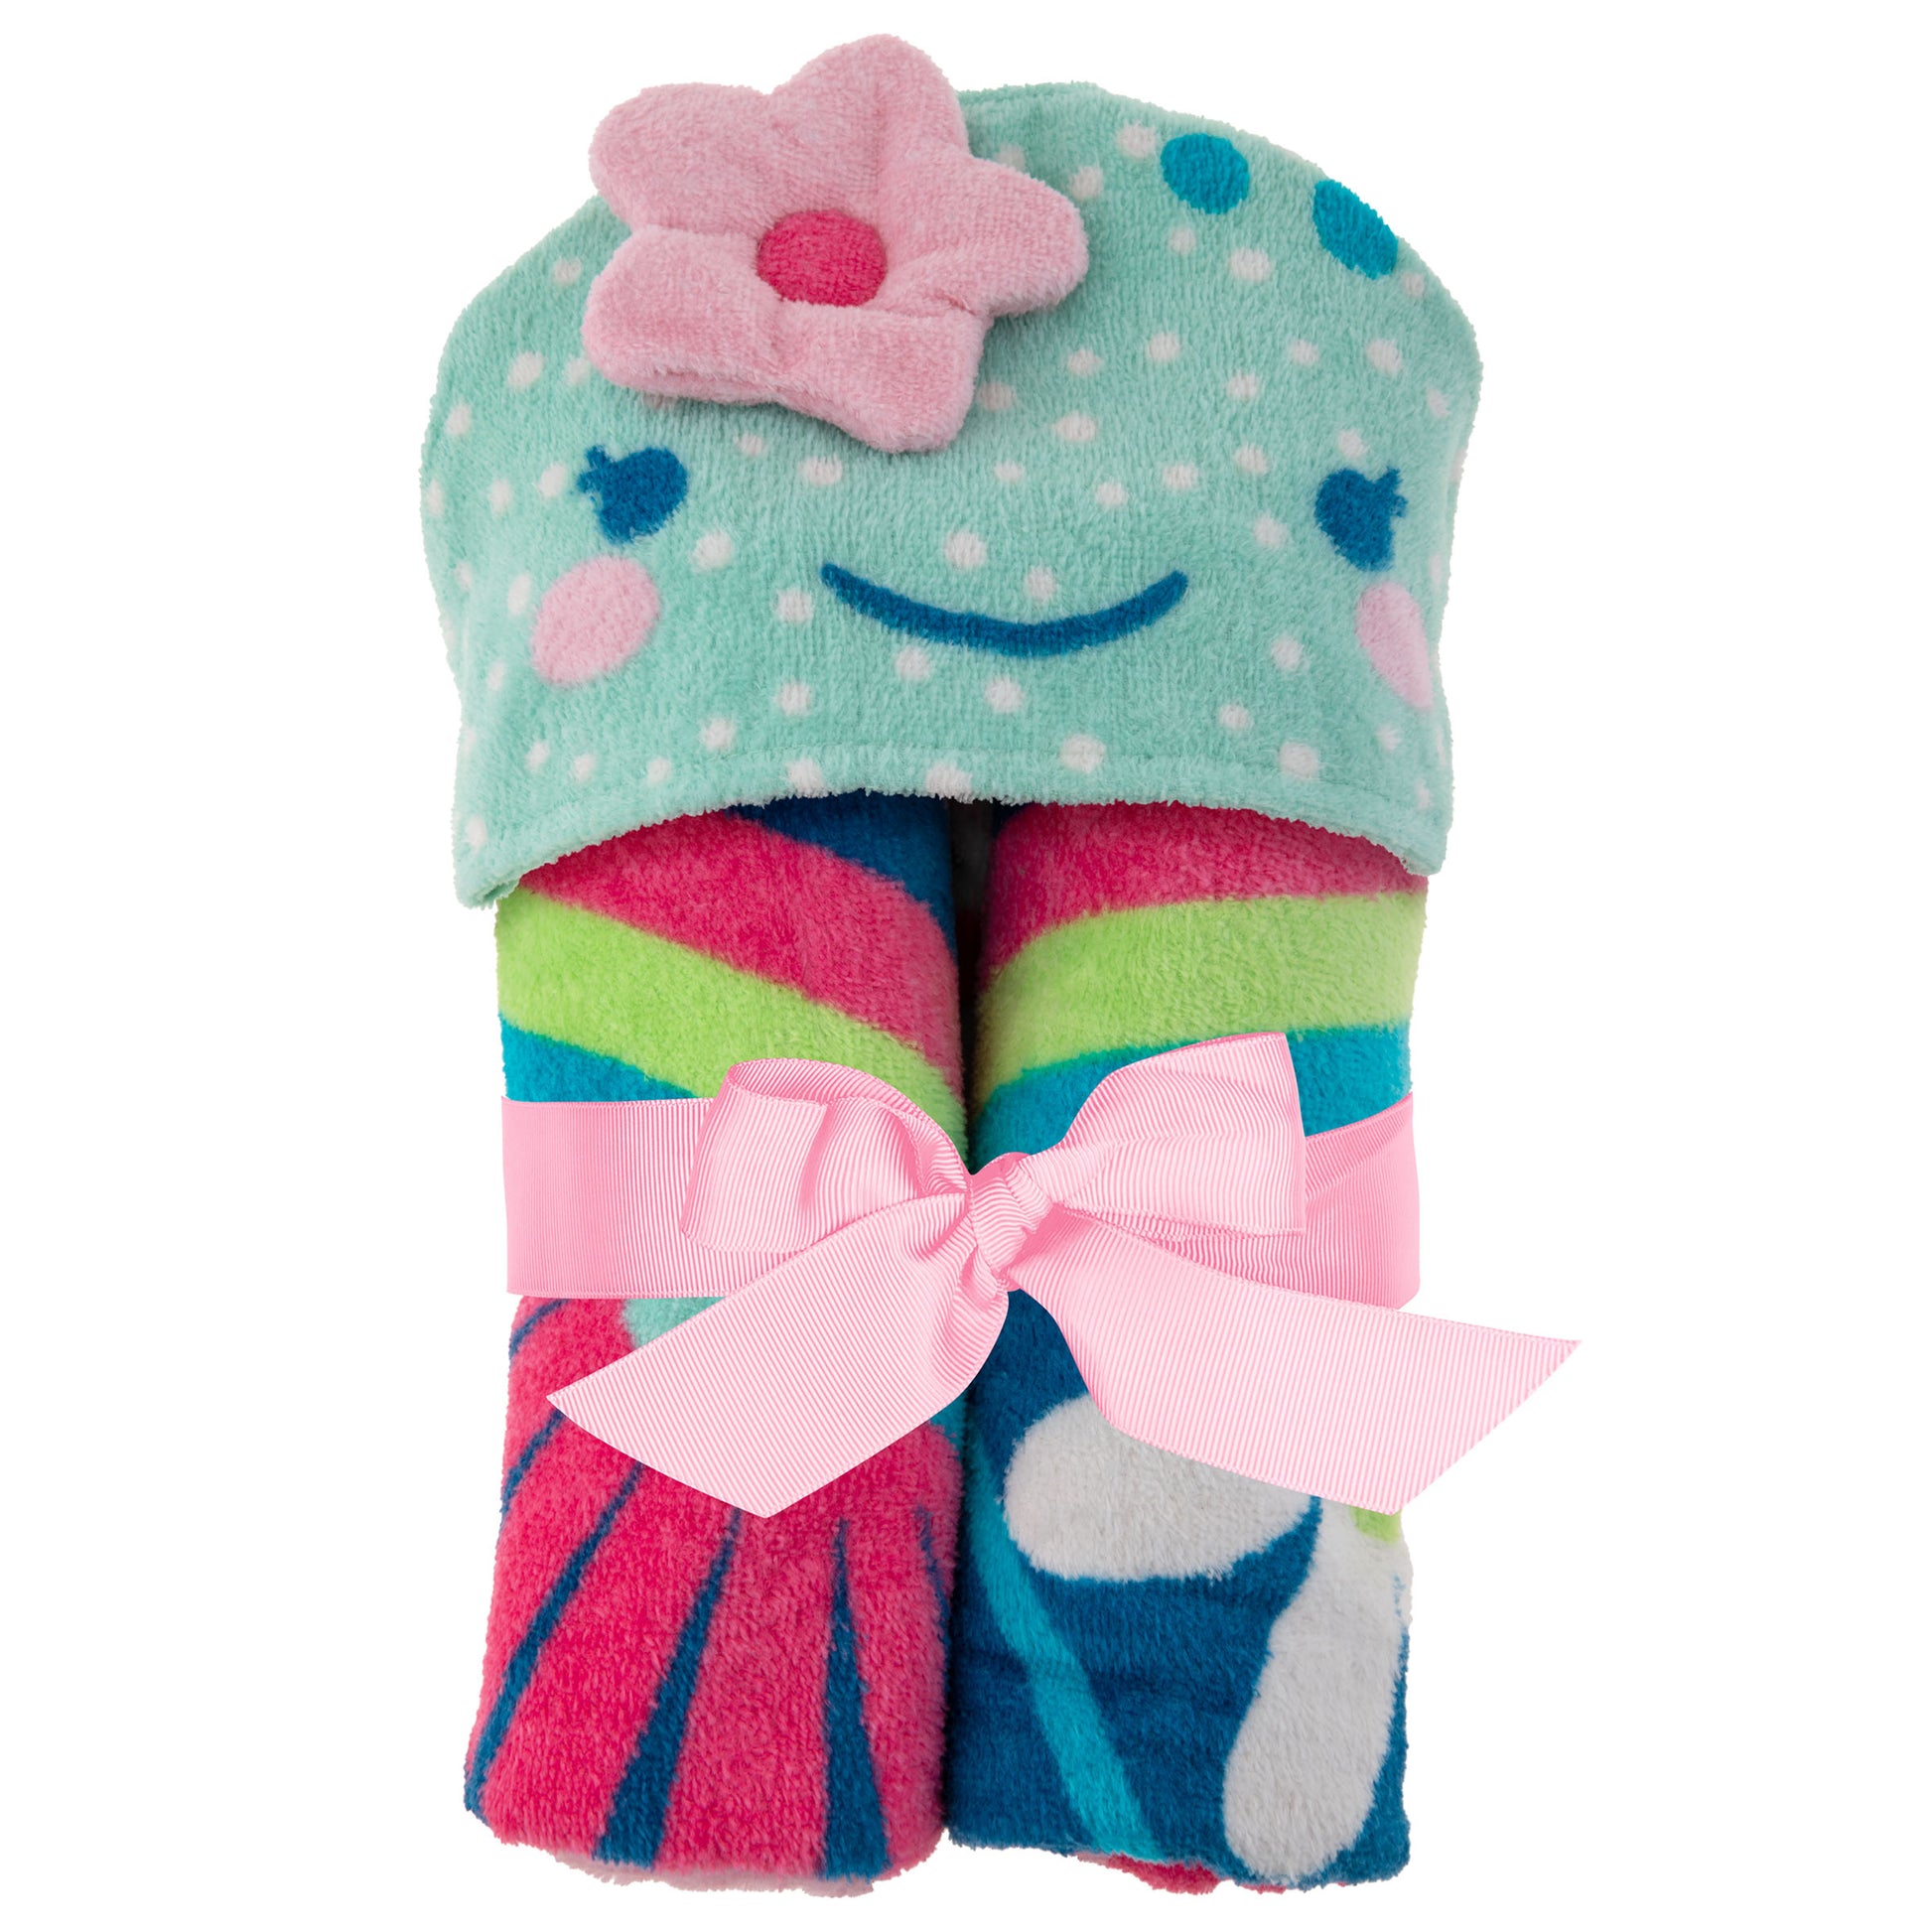 Sea Turtle Hooded Towel with Personalization